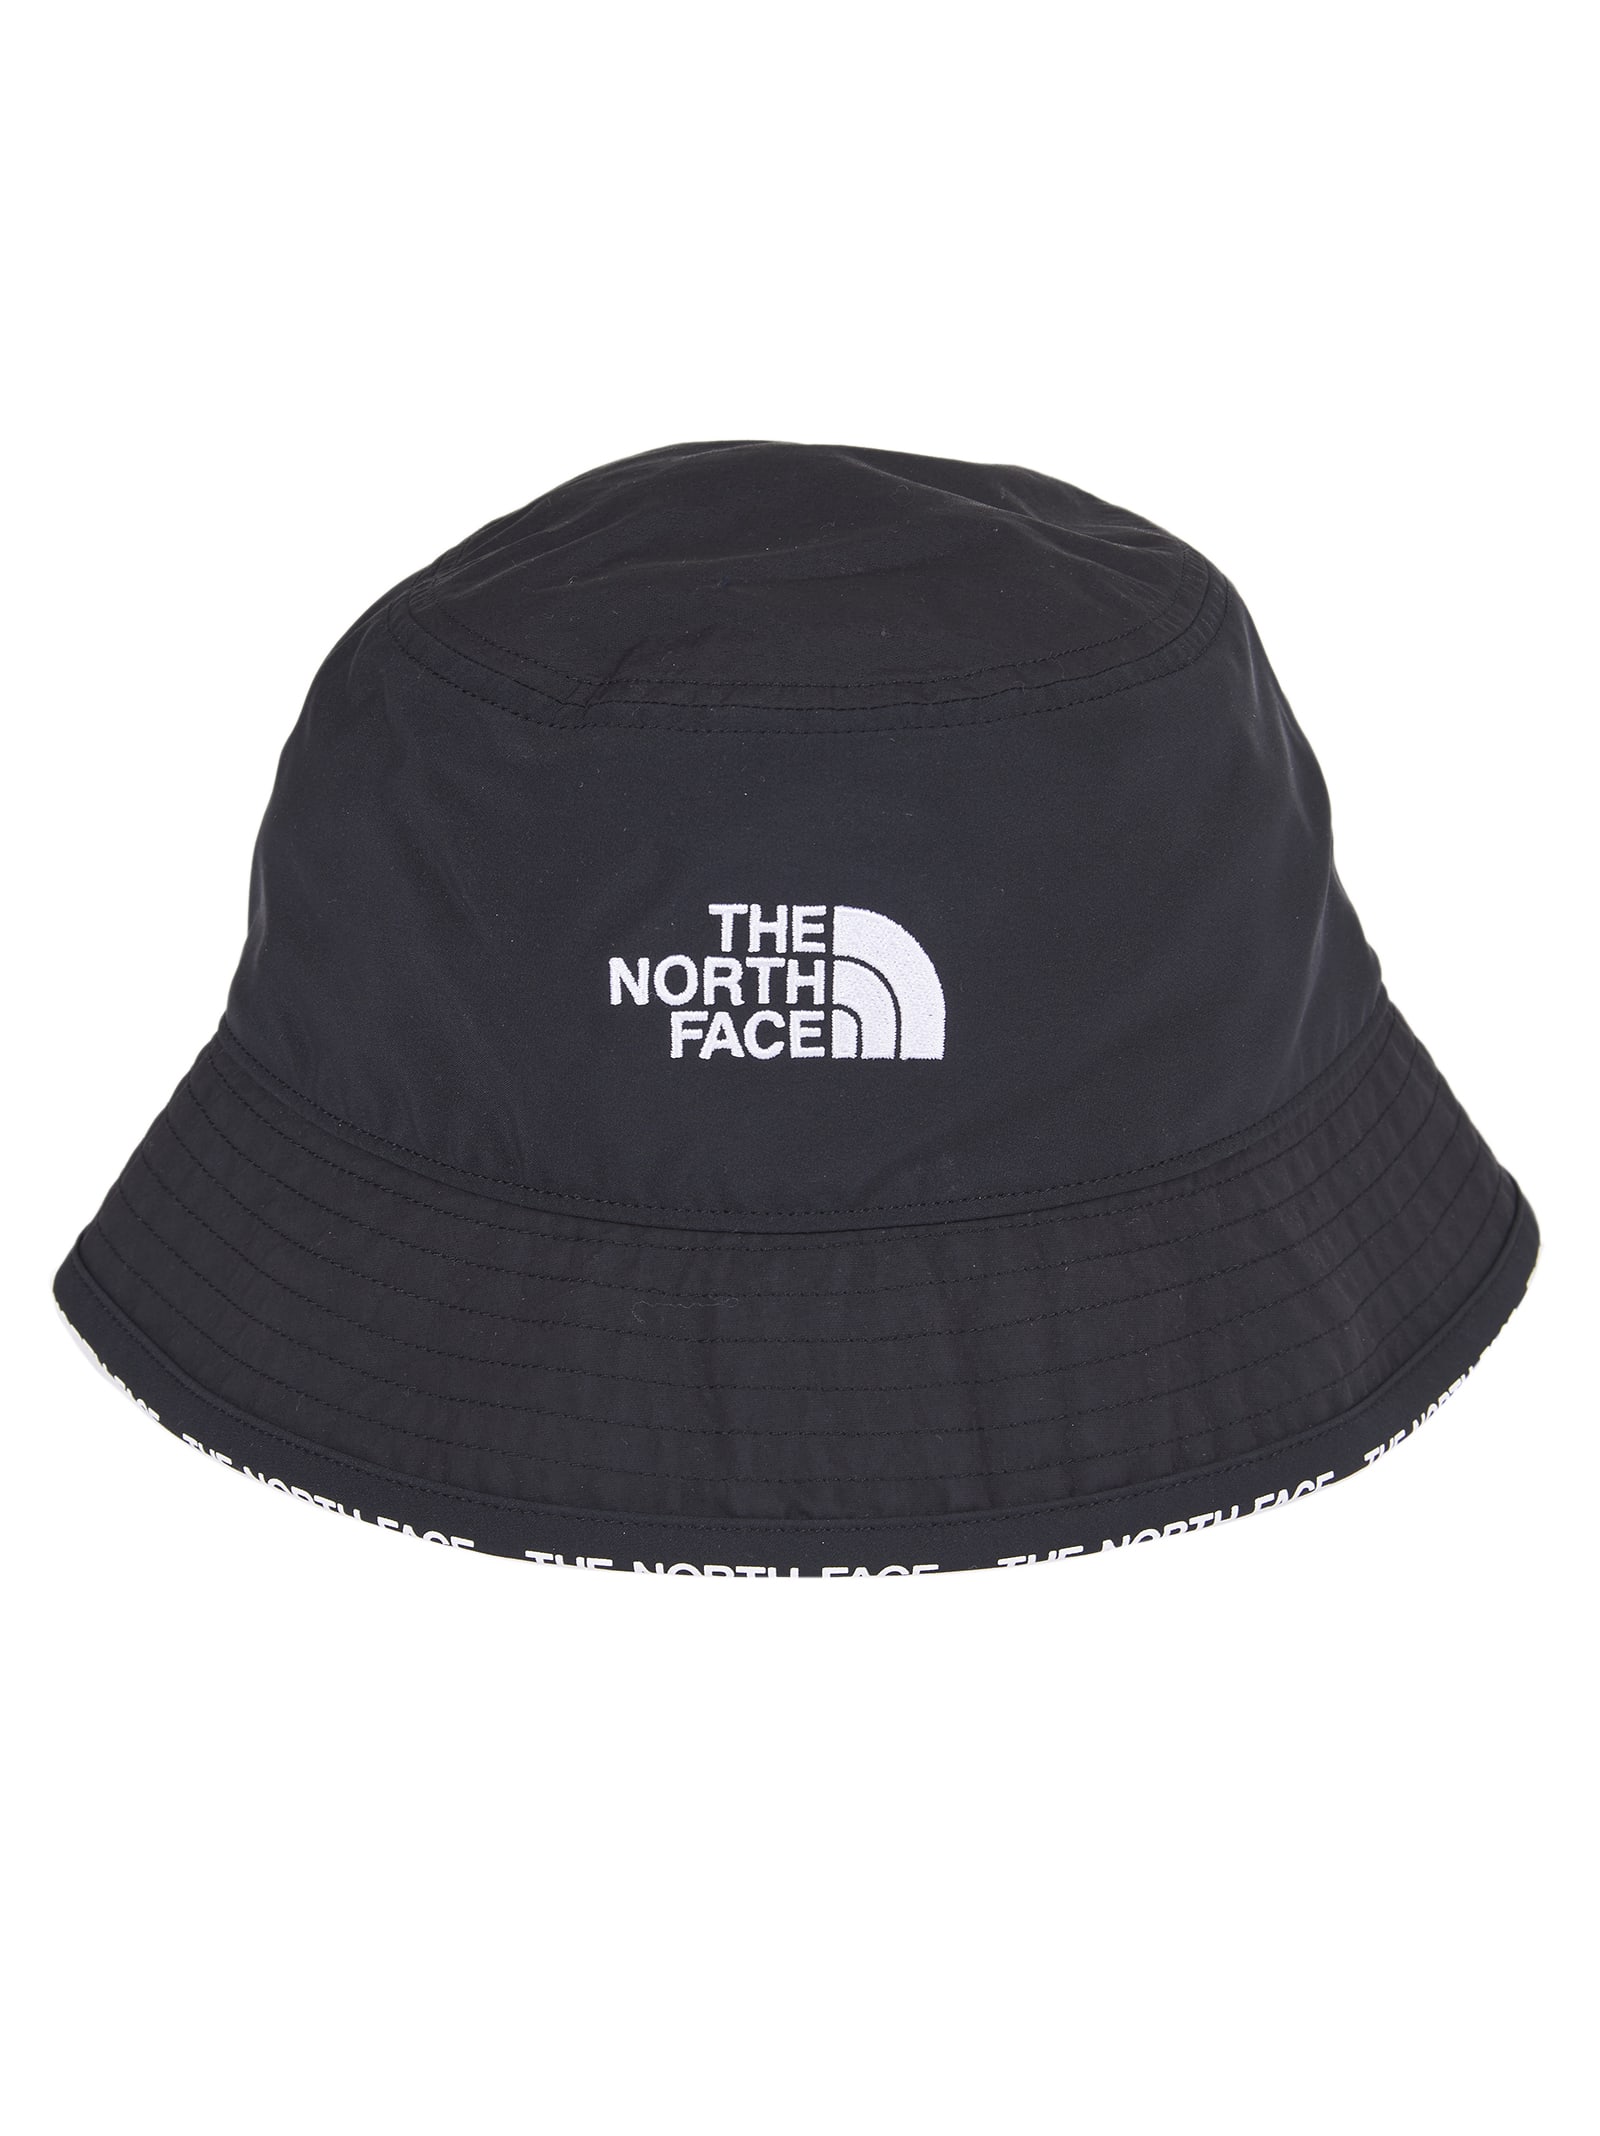 The North Face Class V Brimmer Bucket Hat In Black | ModeSens